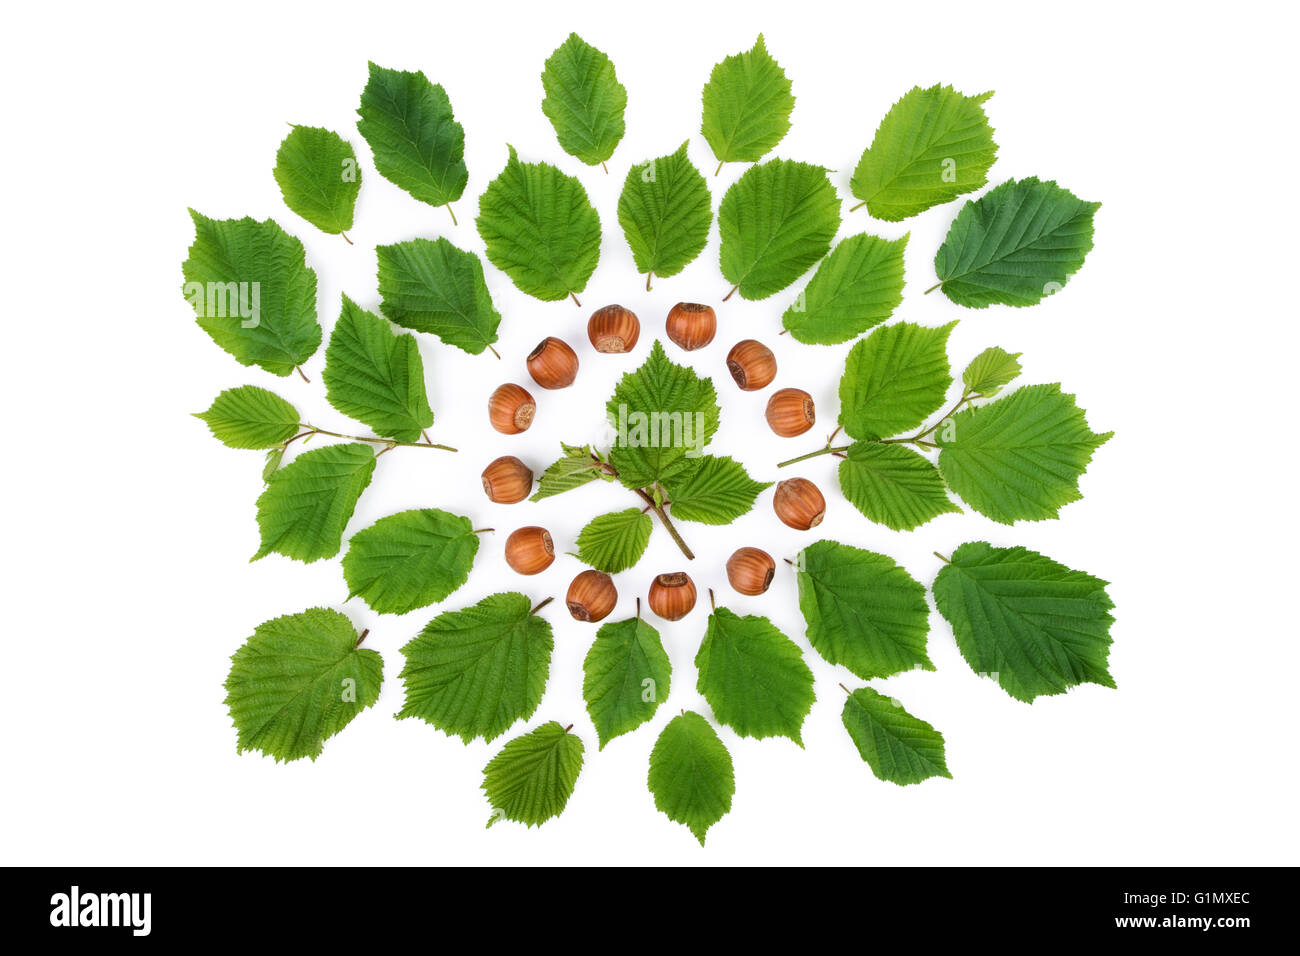 Green leaves with filbert nuts arranged in round shape on white. Top view. Stock Photo